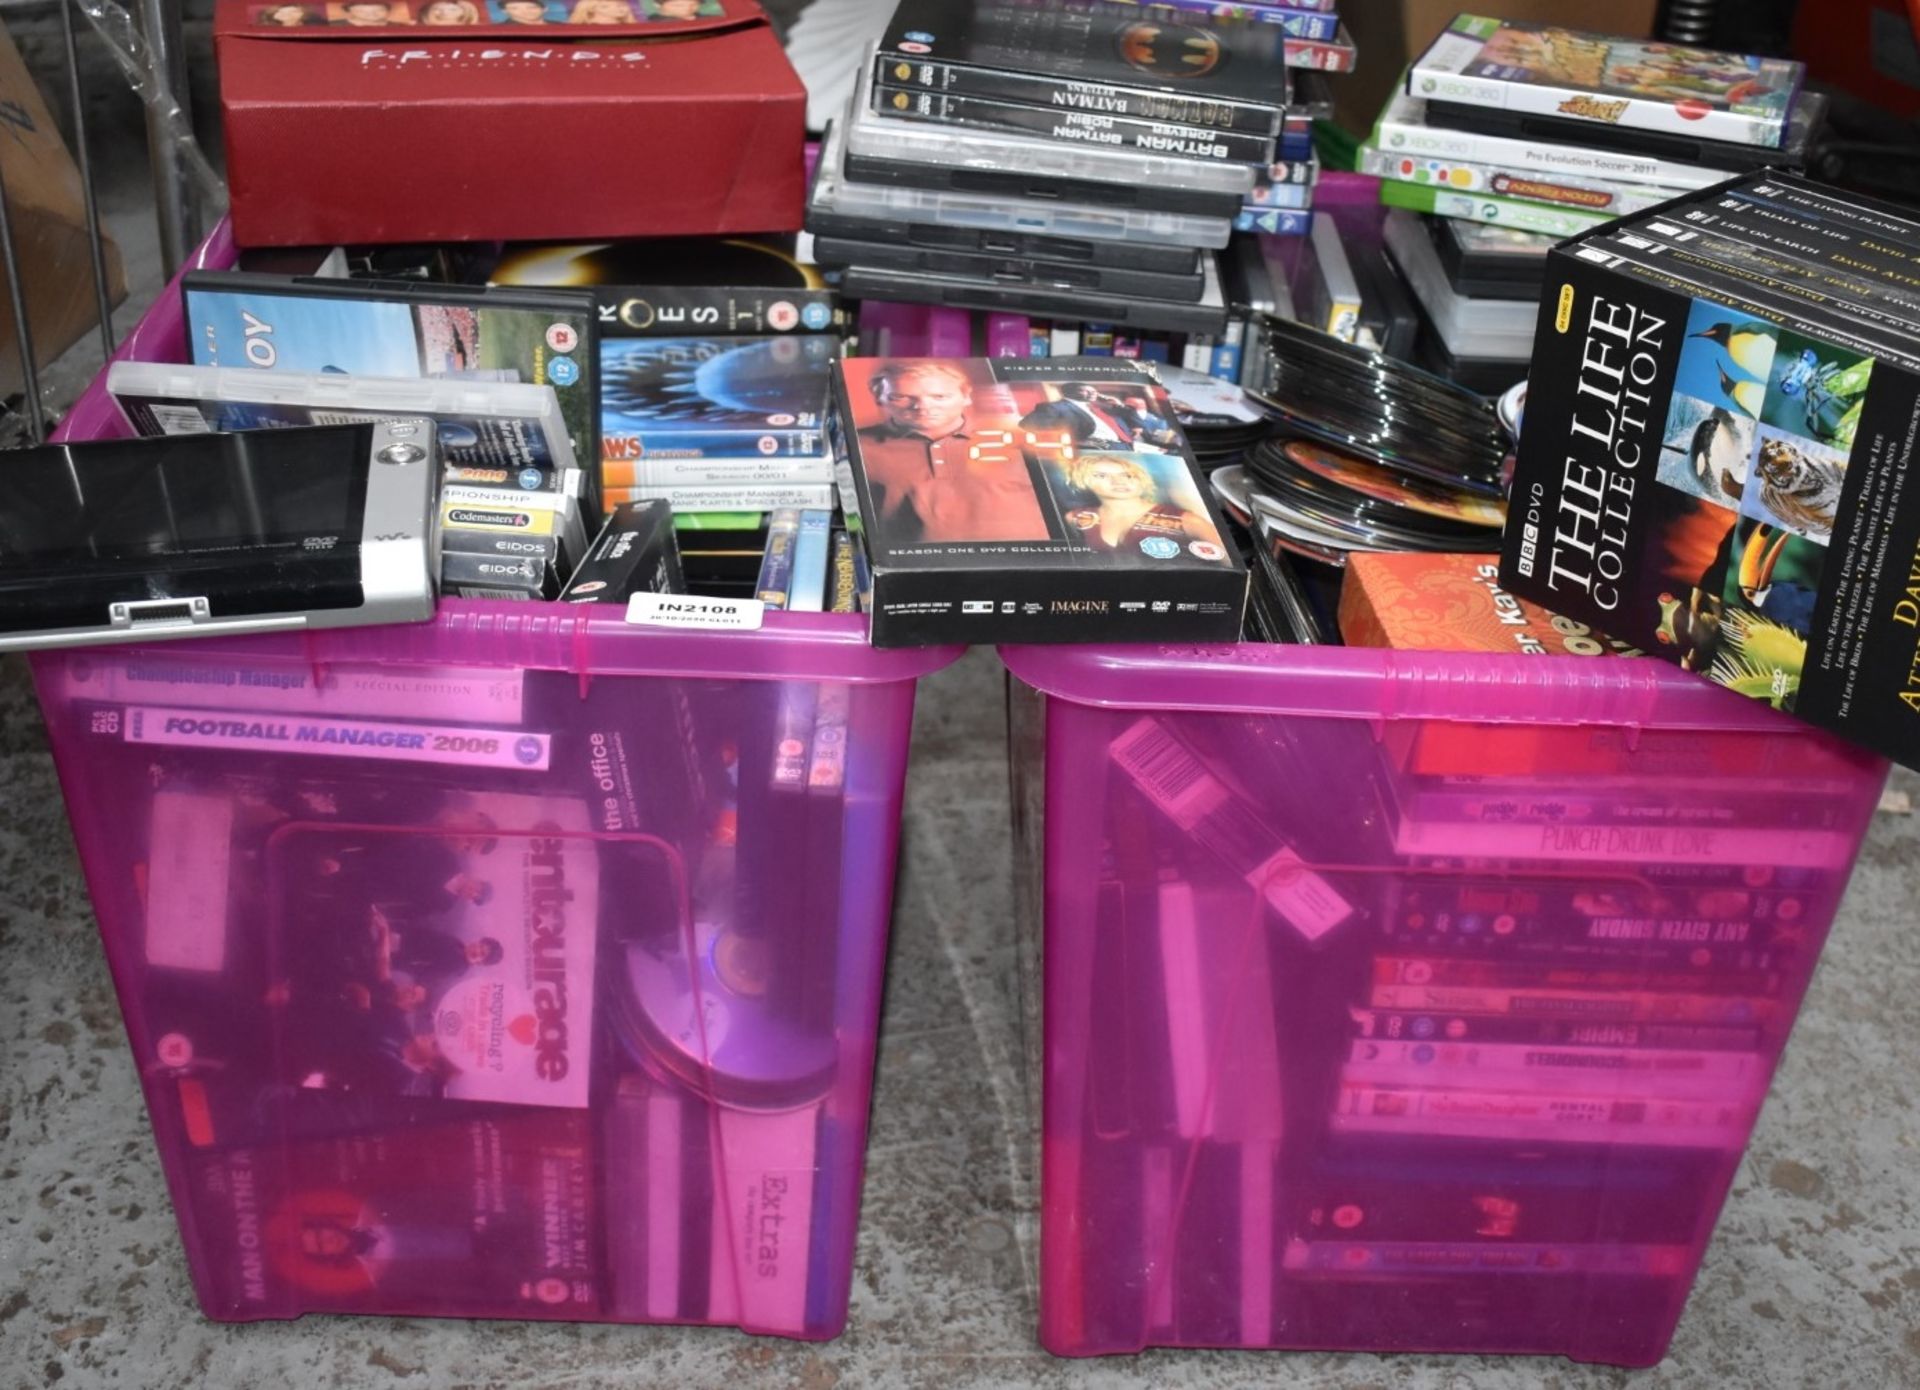 1 x Large Collection of DVD Films and Games - Plus Box Sets and Portable DVD Player - Ref: In2108 - Image 9 of 10